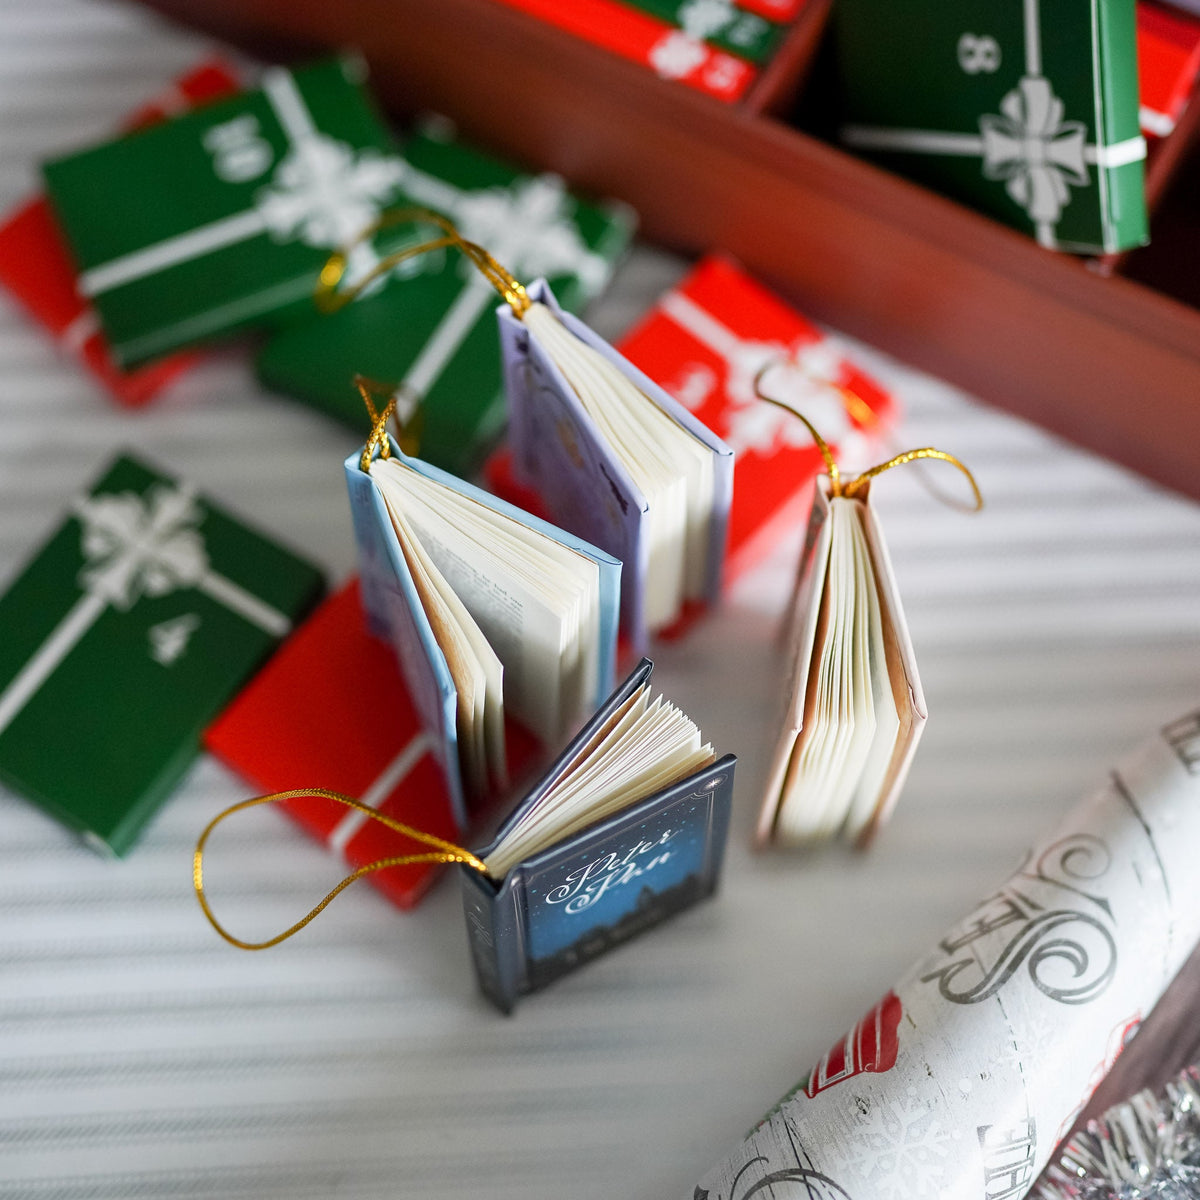 Mini Classic Literature Book Ornament Advent Calendar with 25 tiny books by classic authors